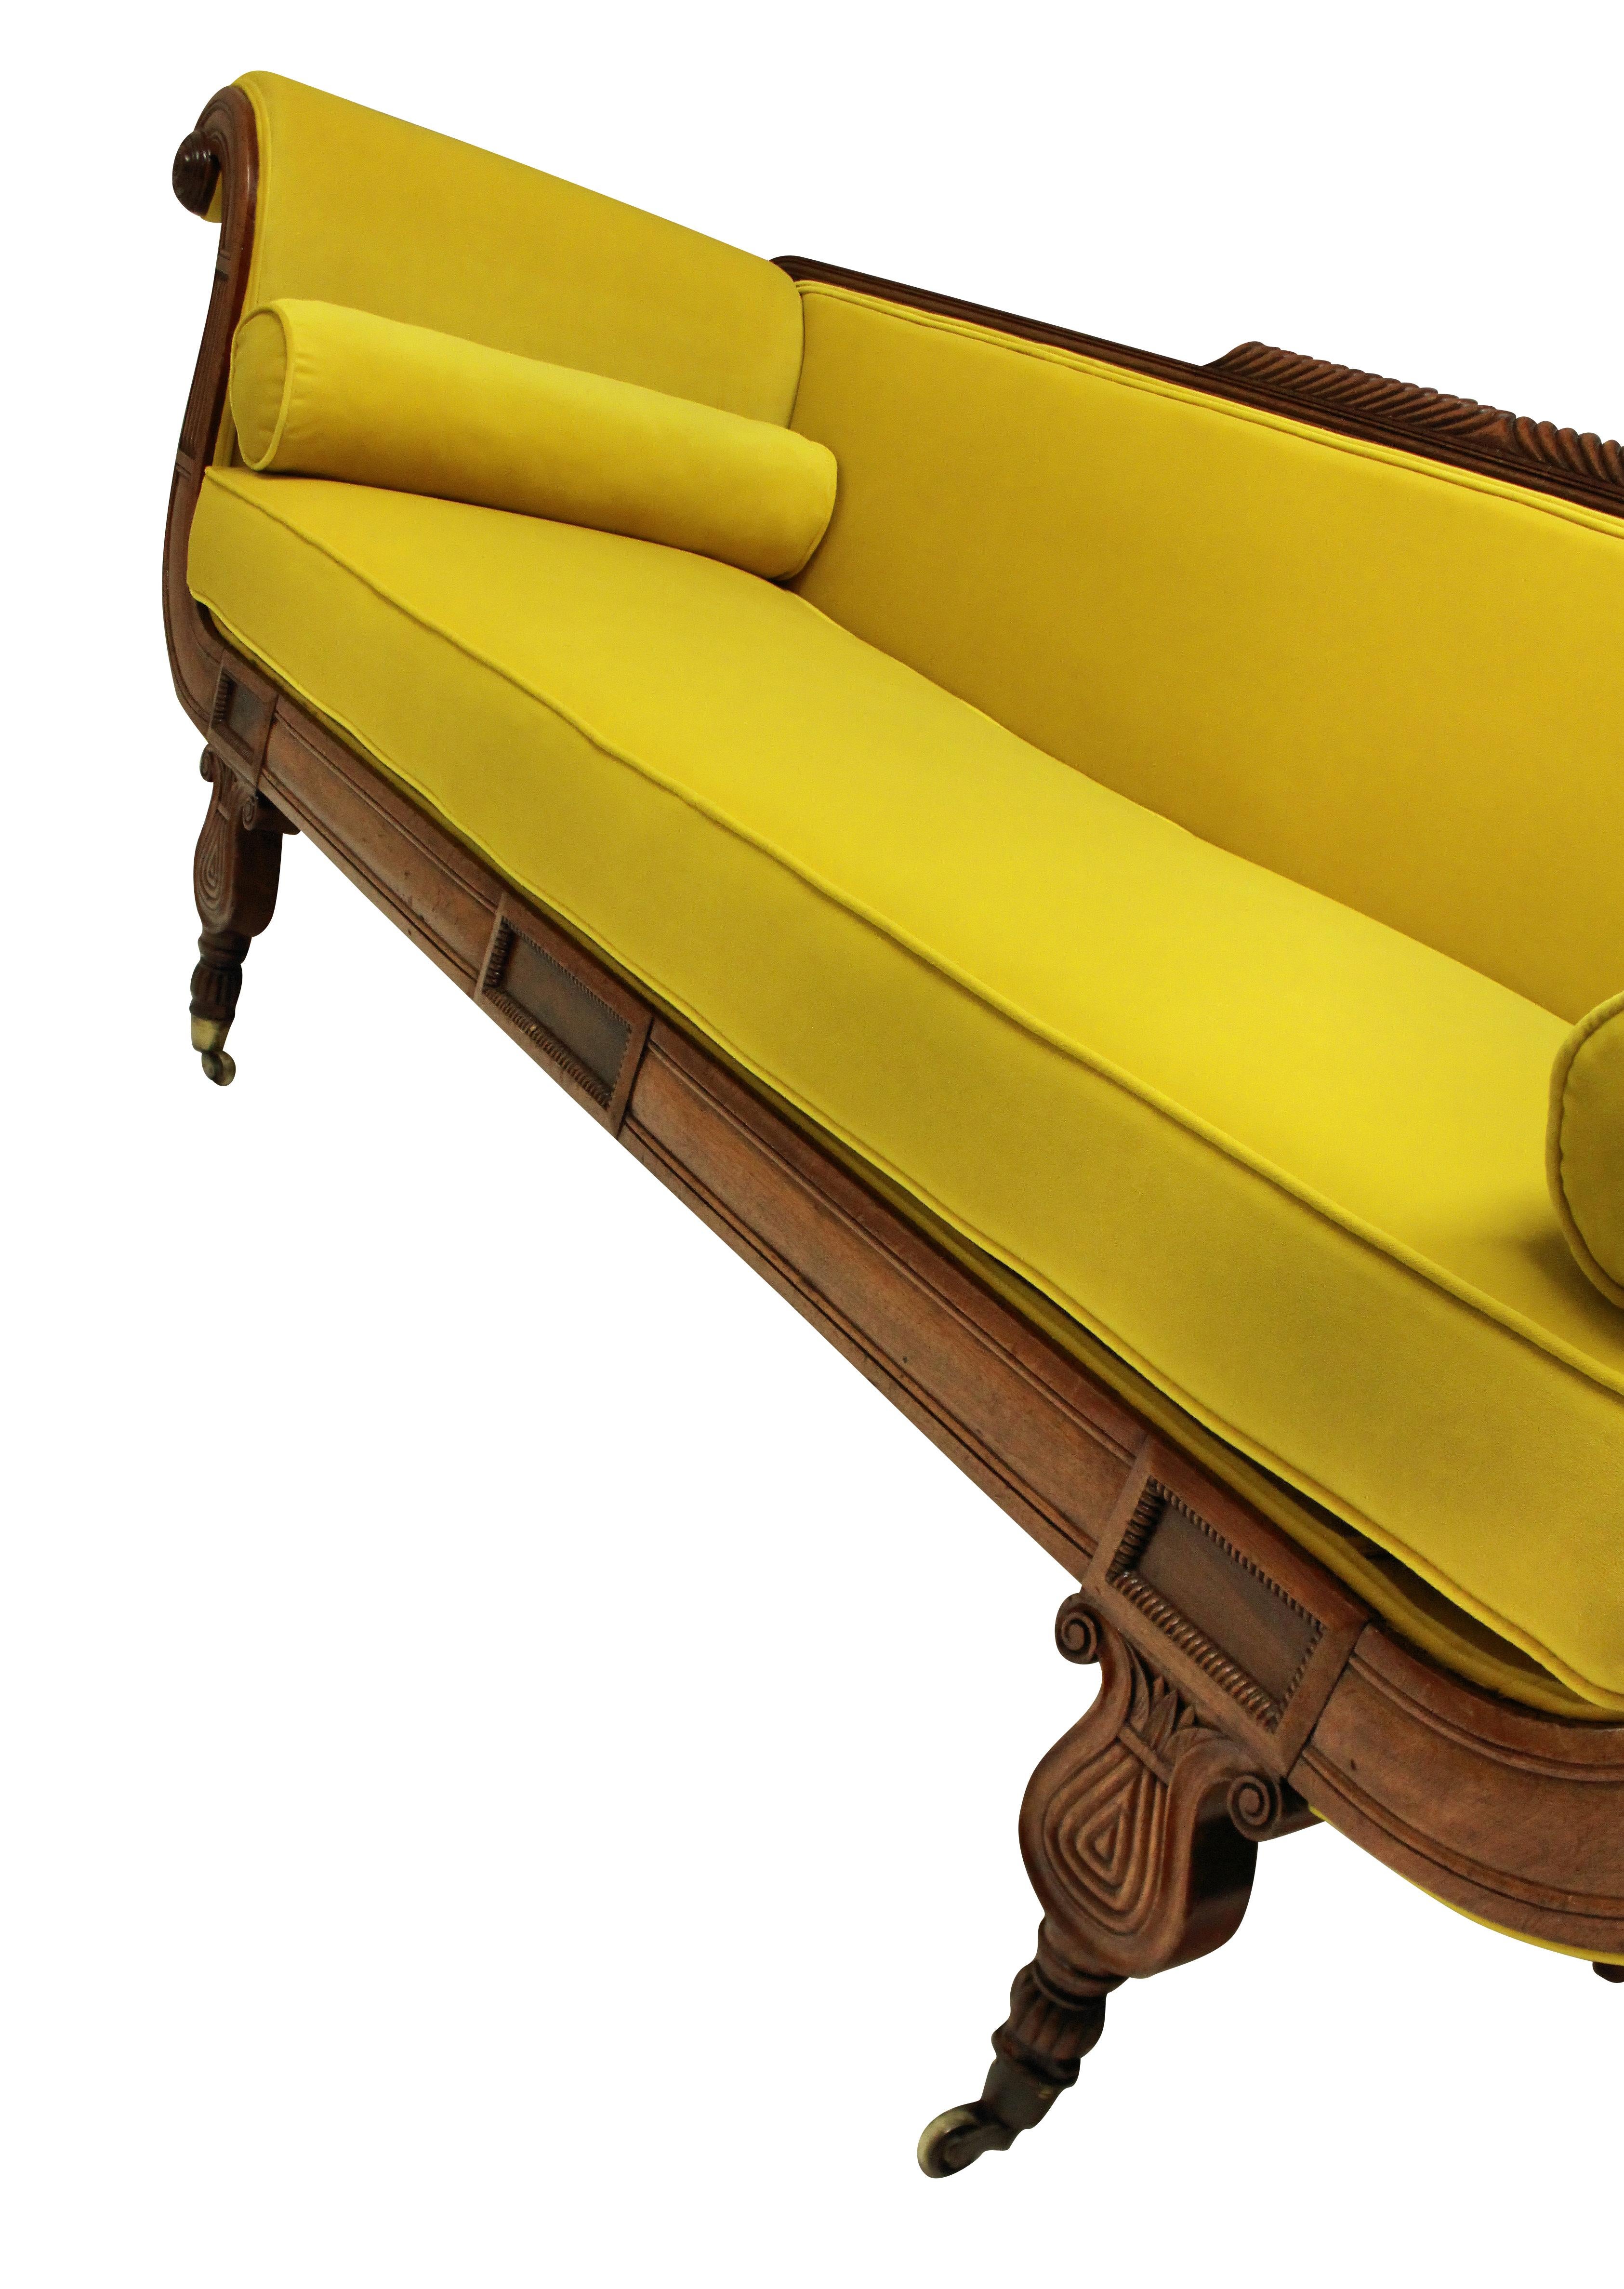 An English Regency daybed, of neoclassical design in crisply carved mahogany and newly upholstered in chartreuse velvet.